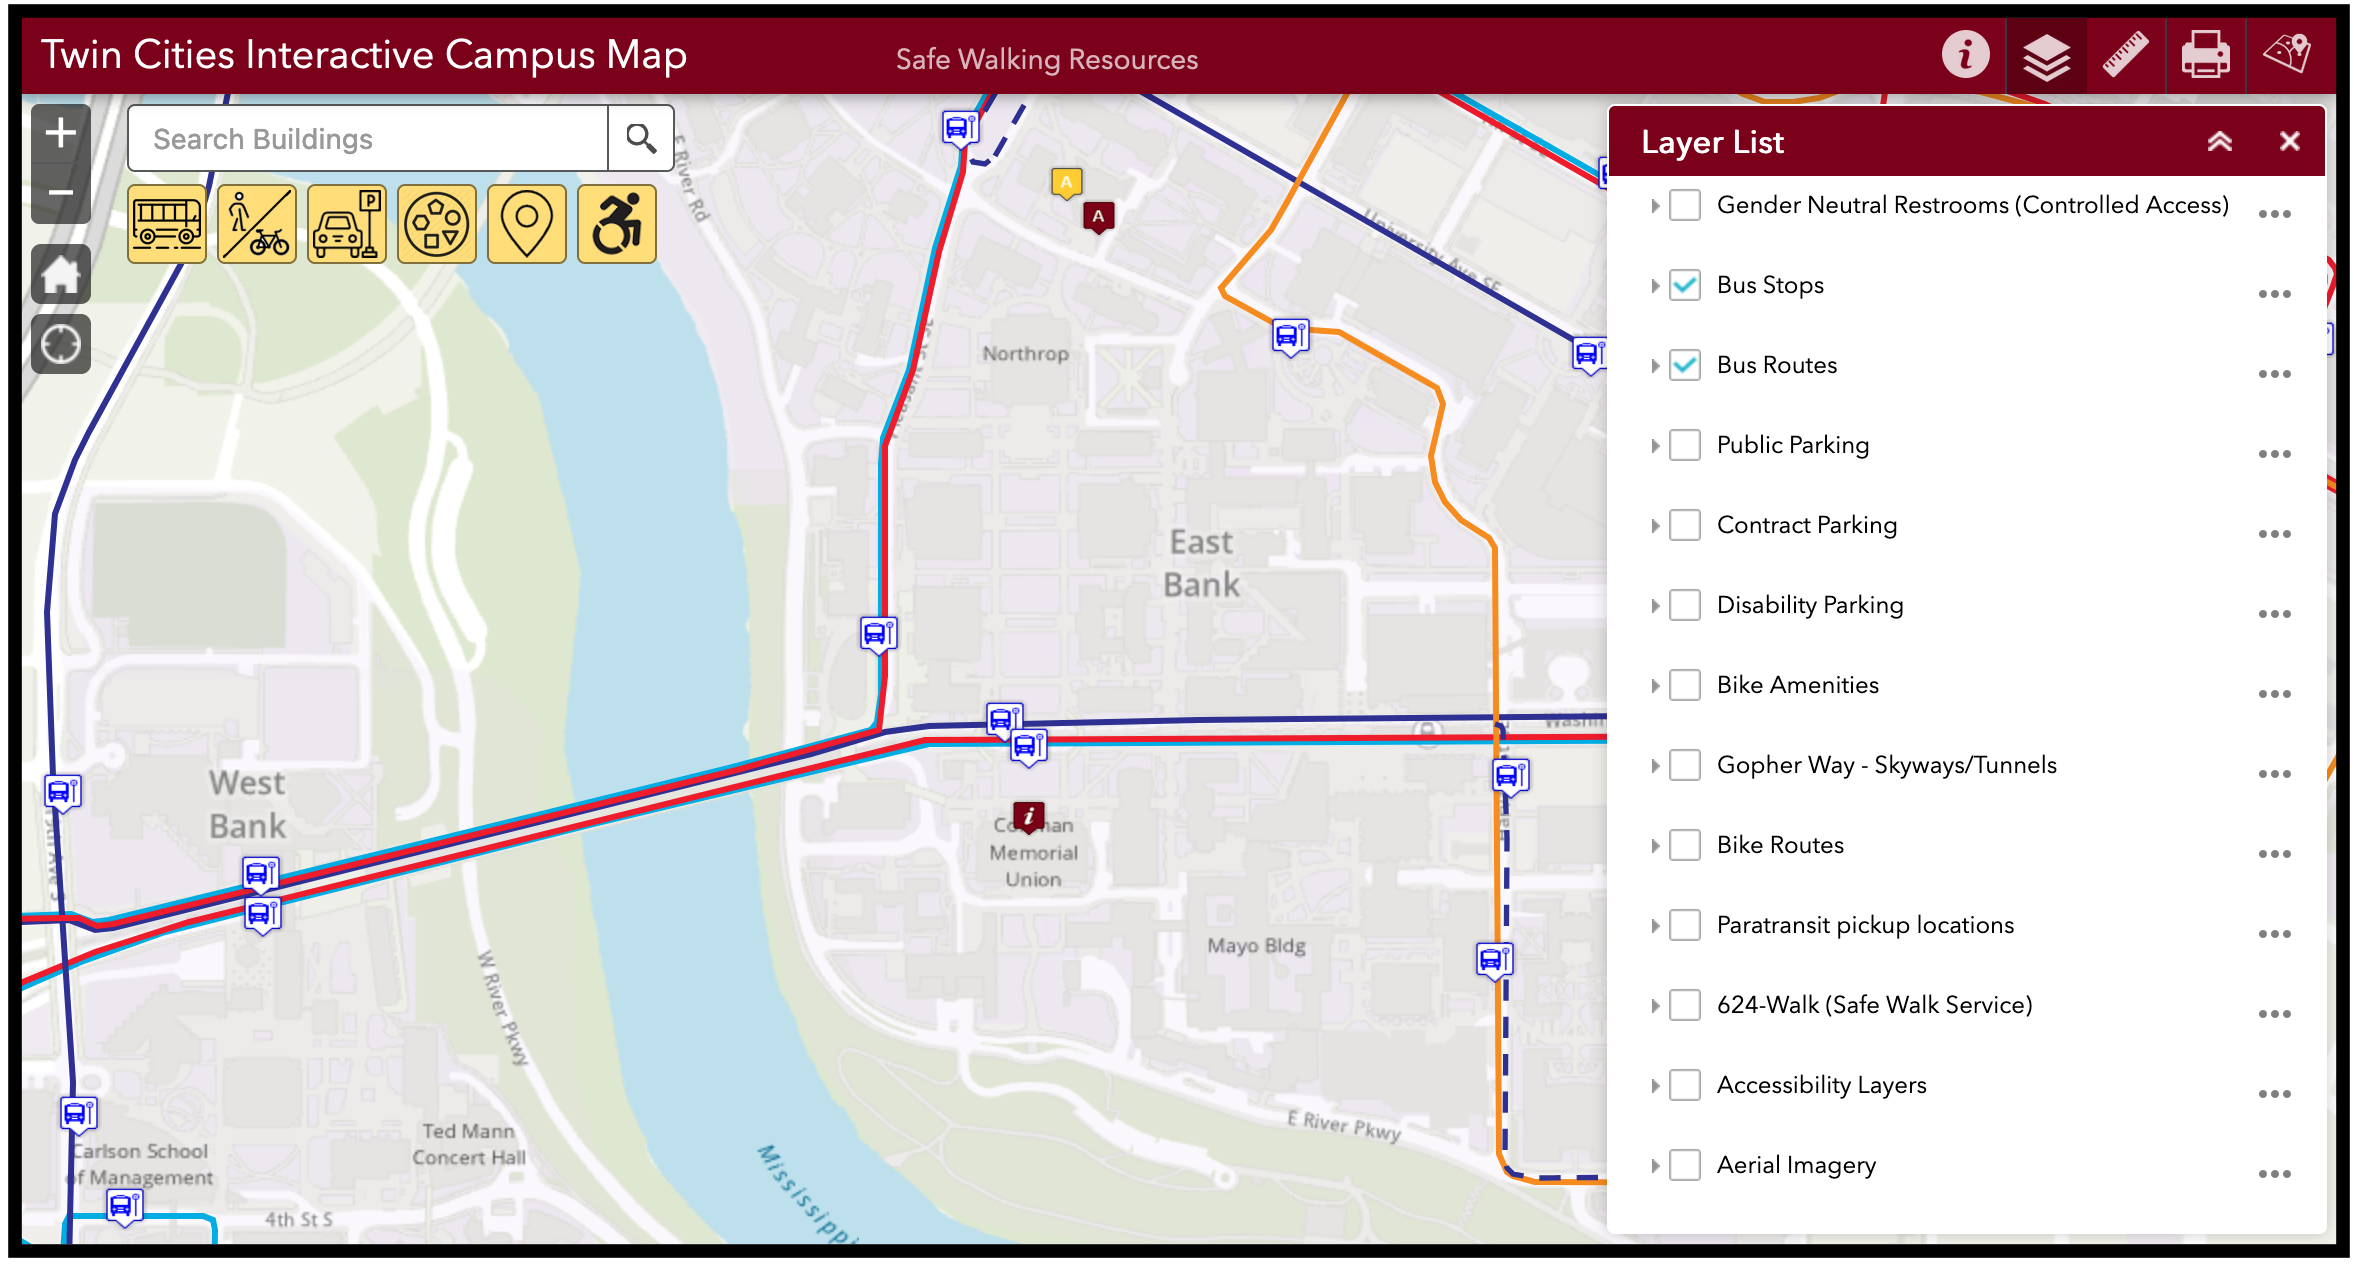 Image of campus map showing bus stops